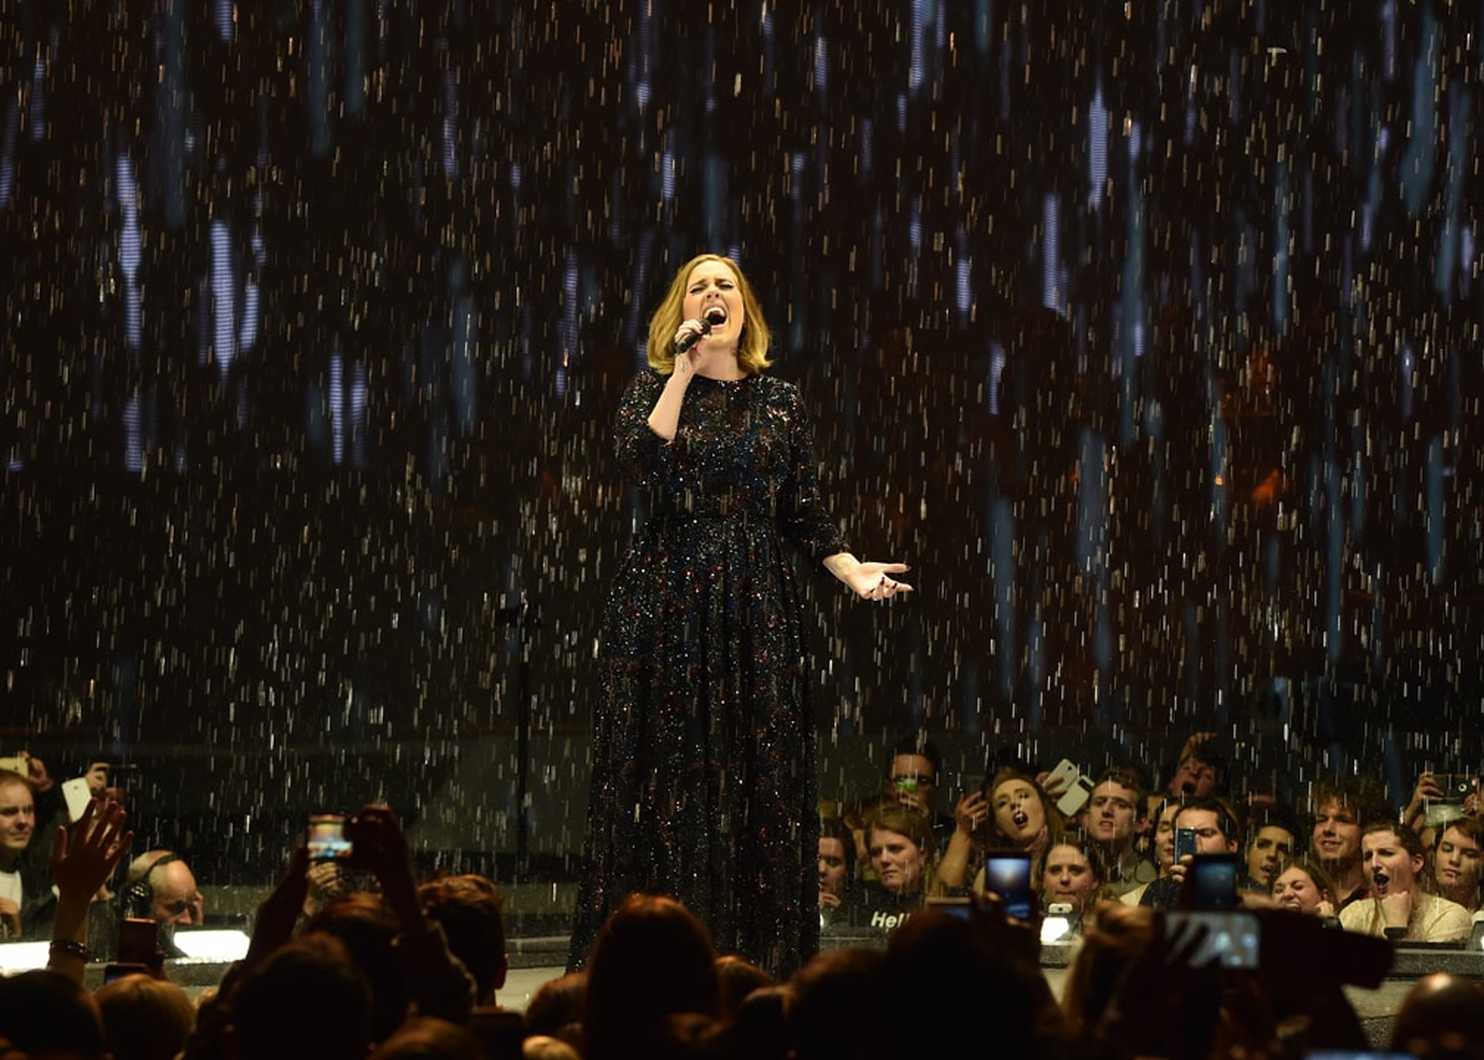 5 observations from Adele's sold-out show at Verizon Center in D.C. ... - Washington Post